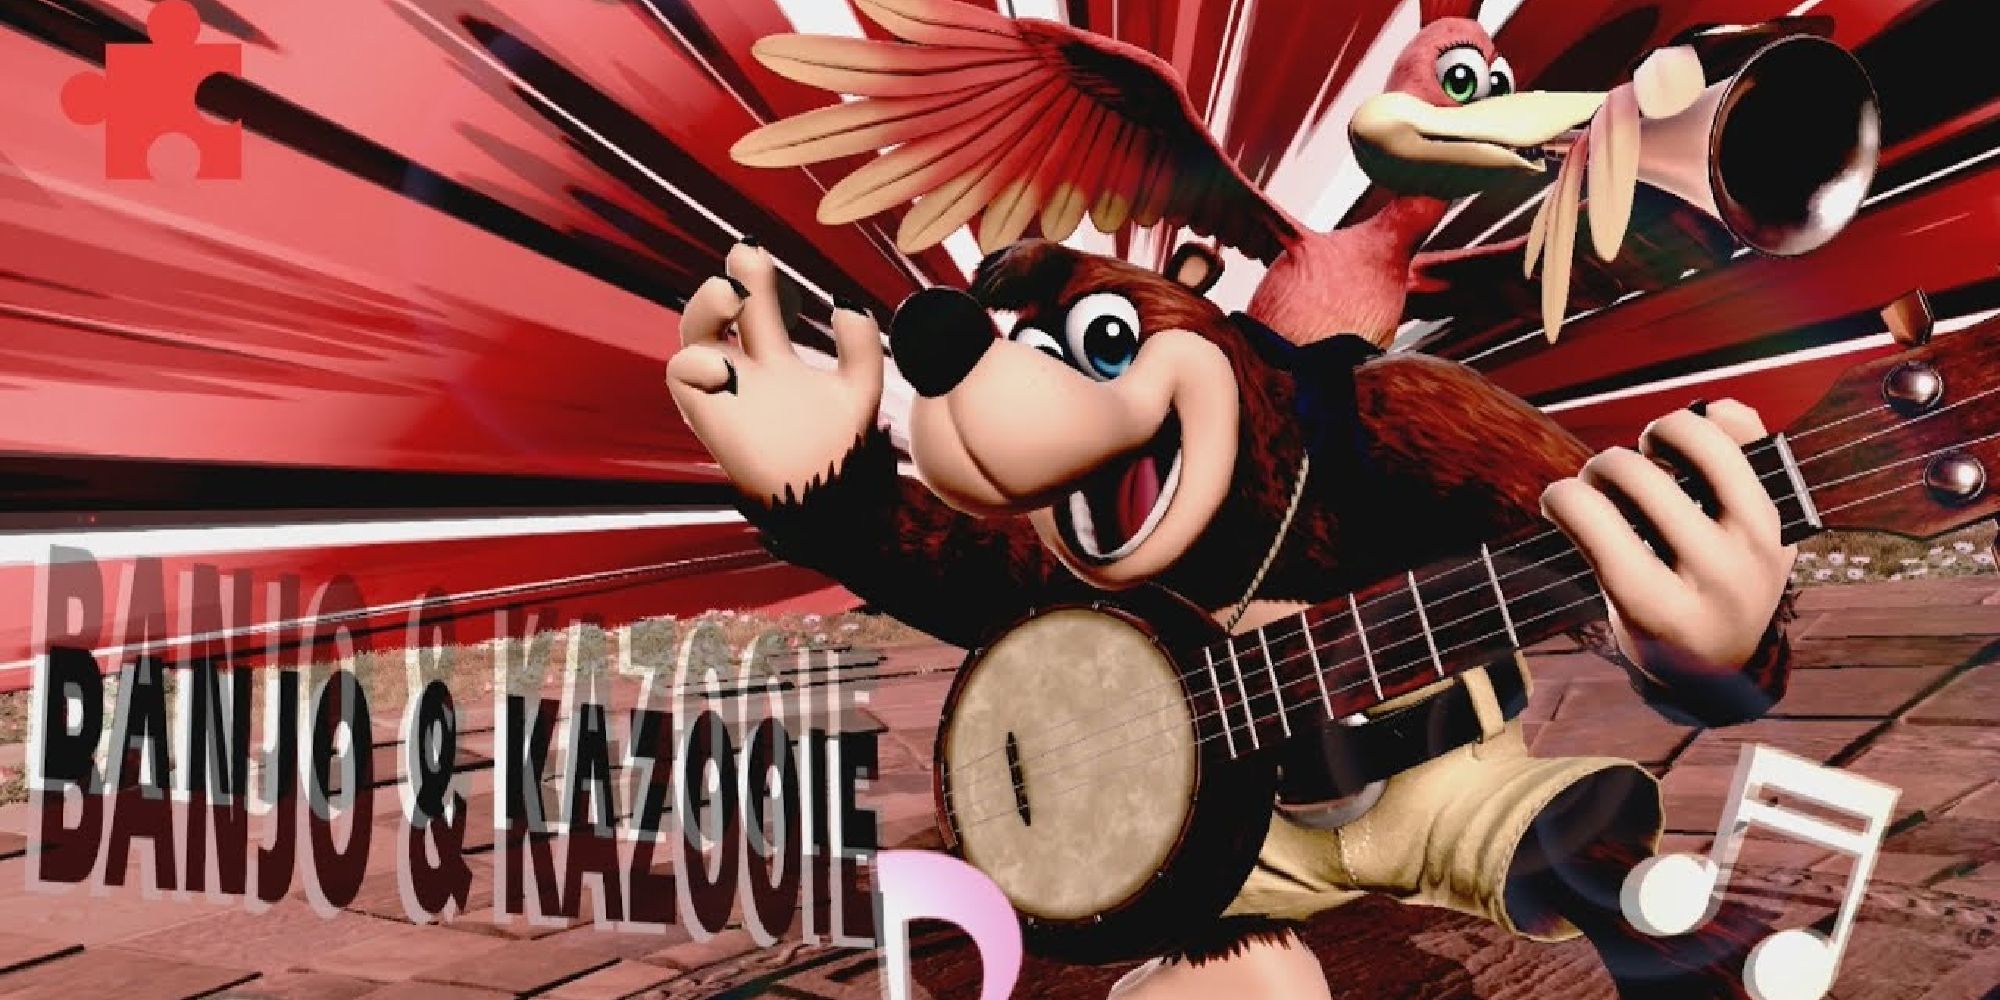 Banjo with a banjo and Kazooie with a kazoo playing music in their victory screen